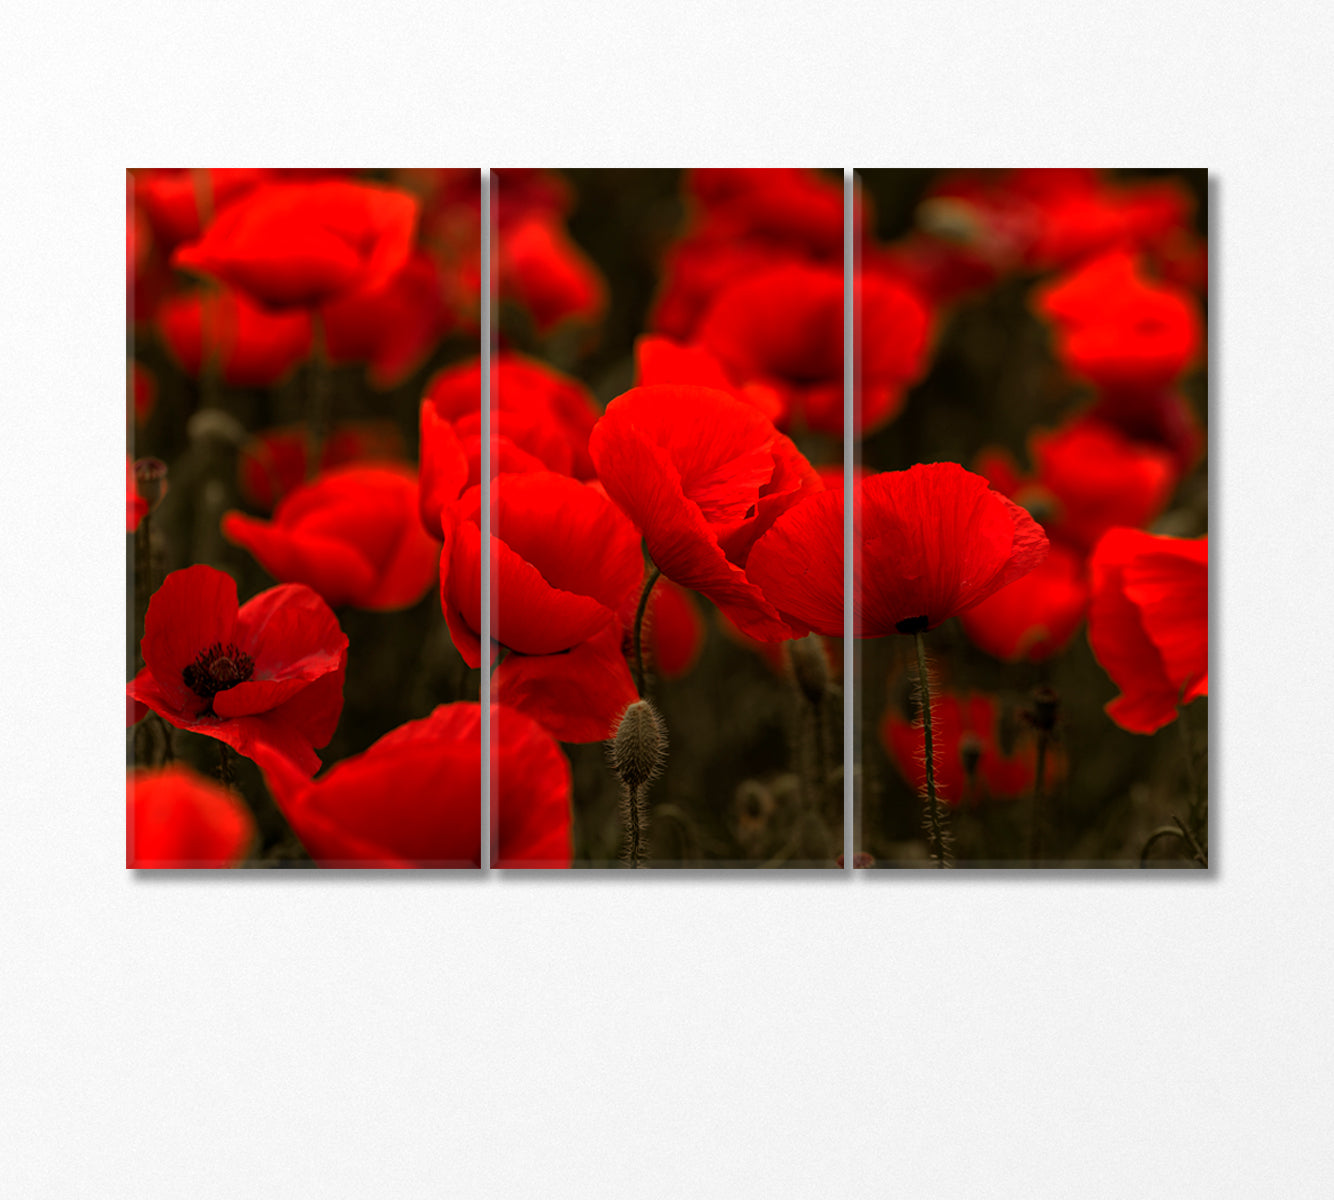 Field of Red Wild Poppies Canvas Print-Canvas Print-CetArt-3 Panels-36x24 inches-CetArt